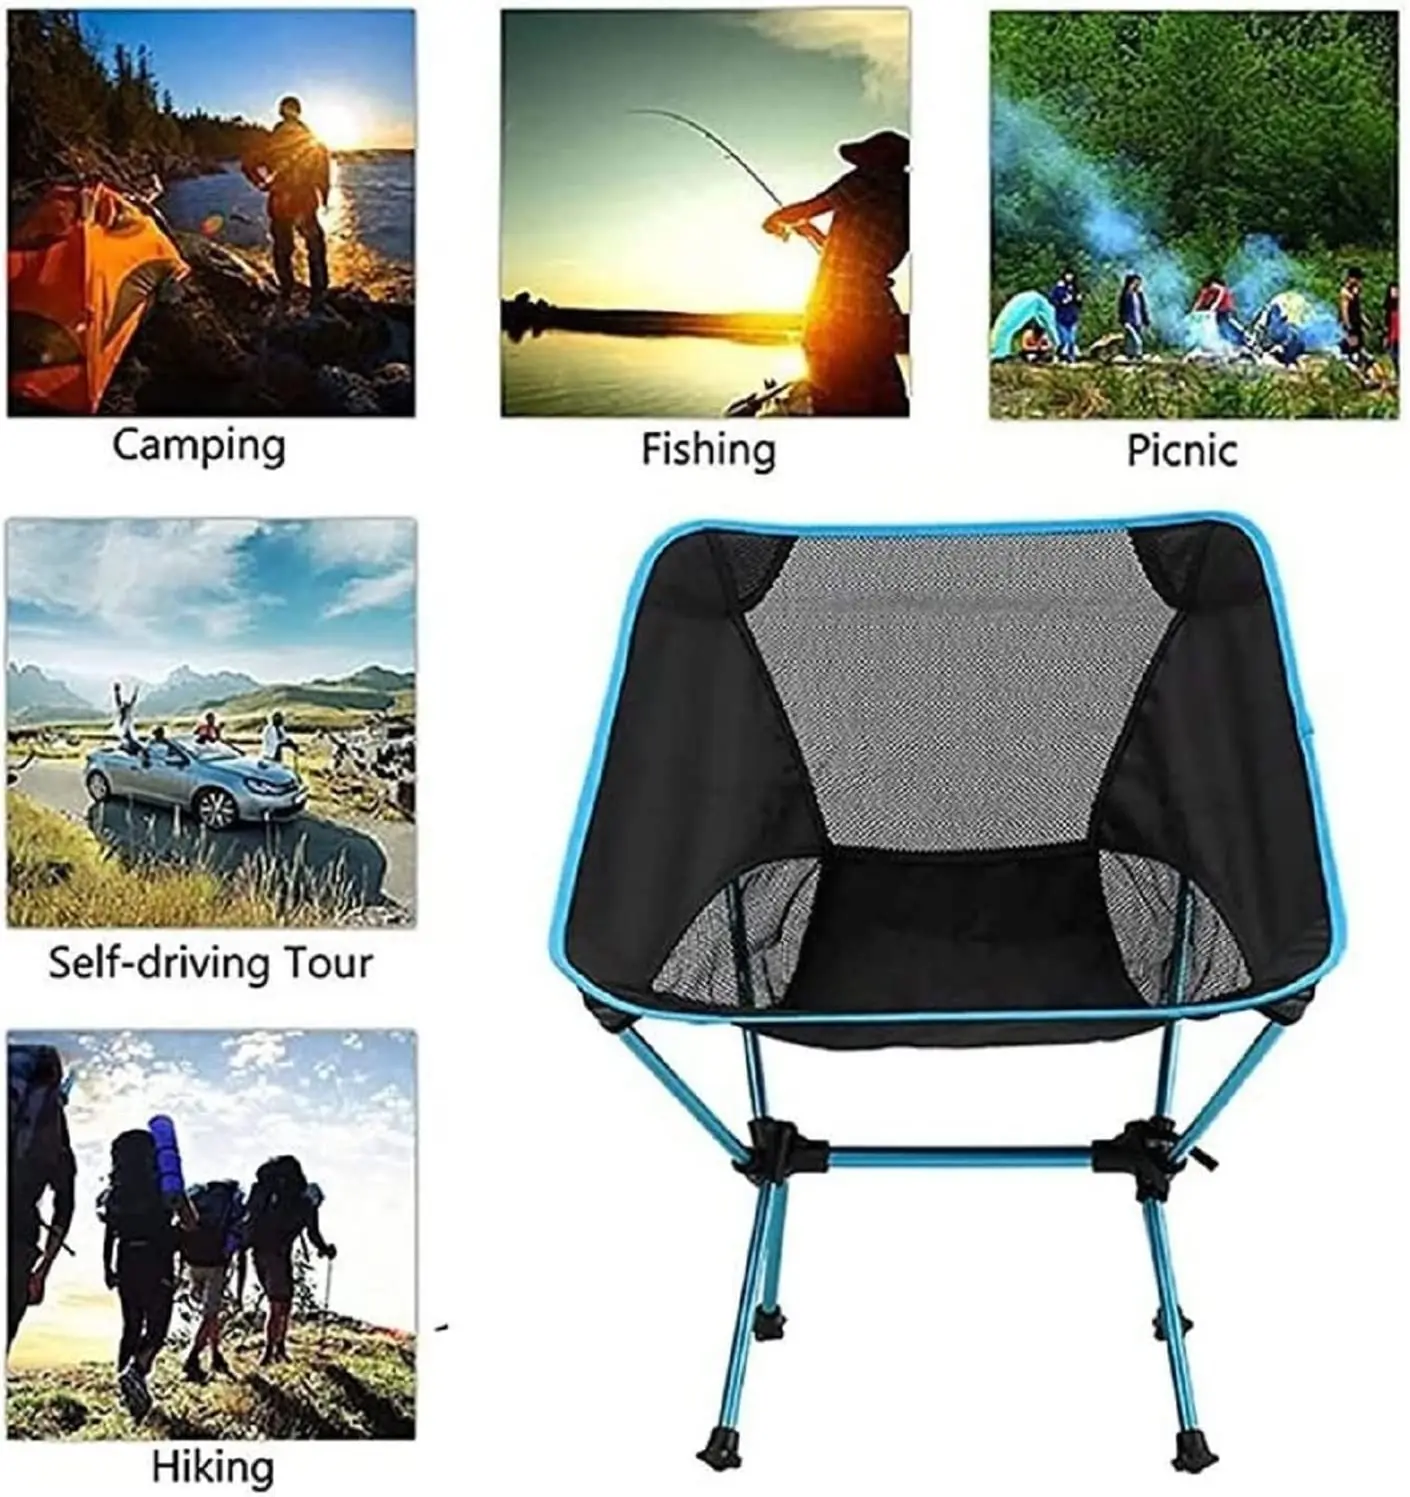 Ultralight Folding Chair High Load Outdoor Hiking Camping Chairs Superhard Portable For Travel Beach Picnic Seat Fishing Tools enlarge